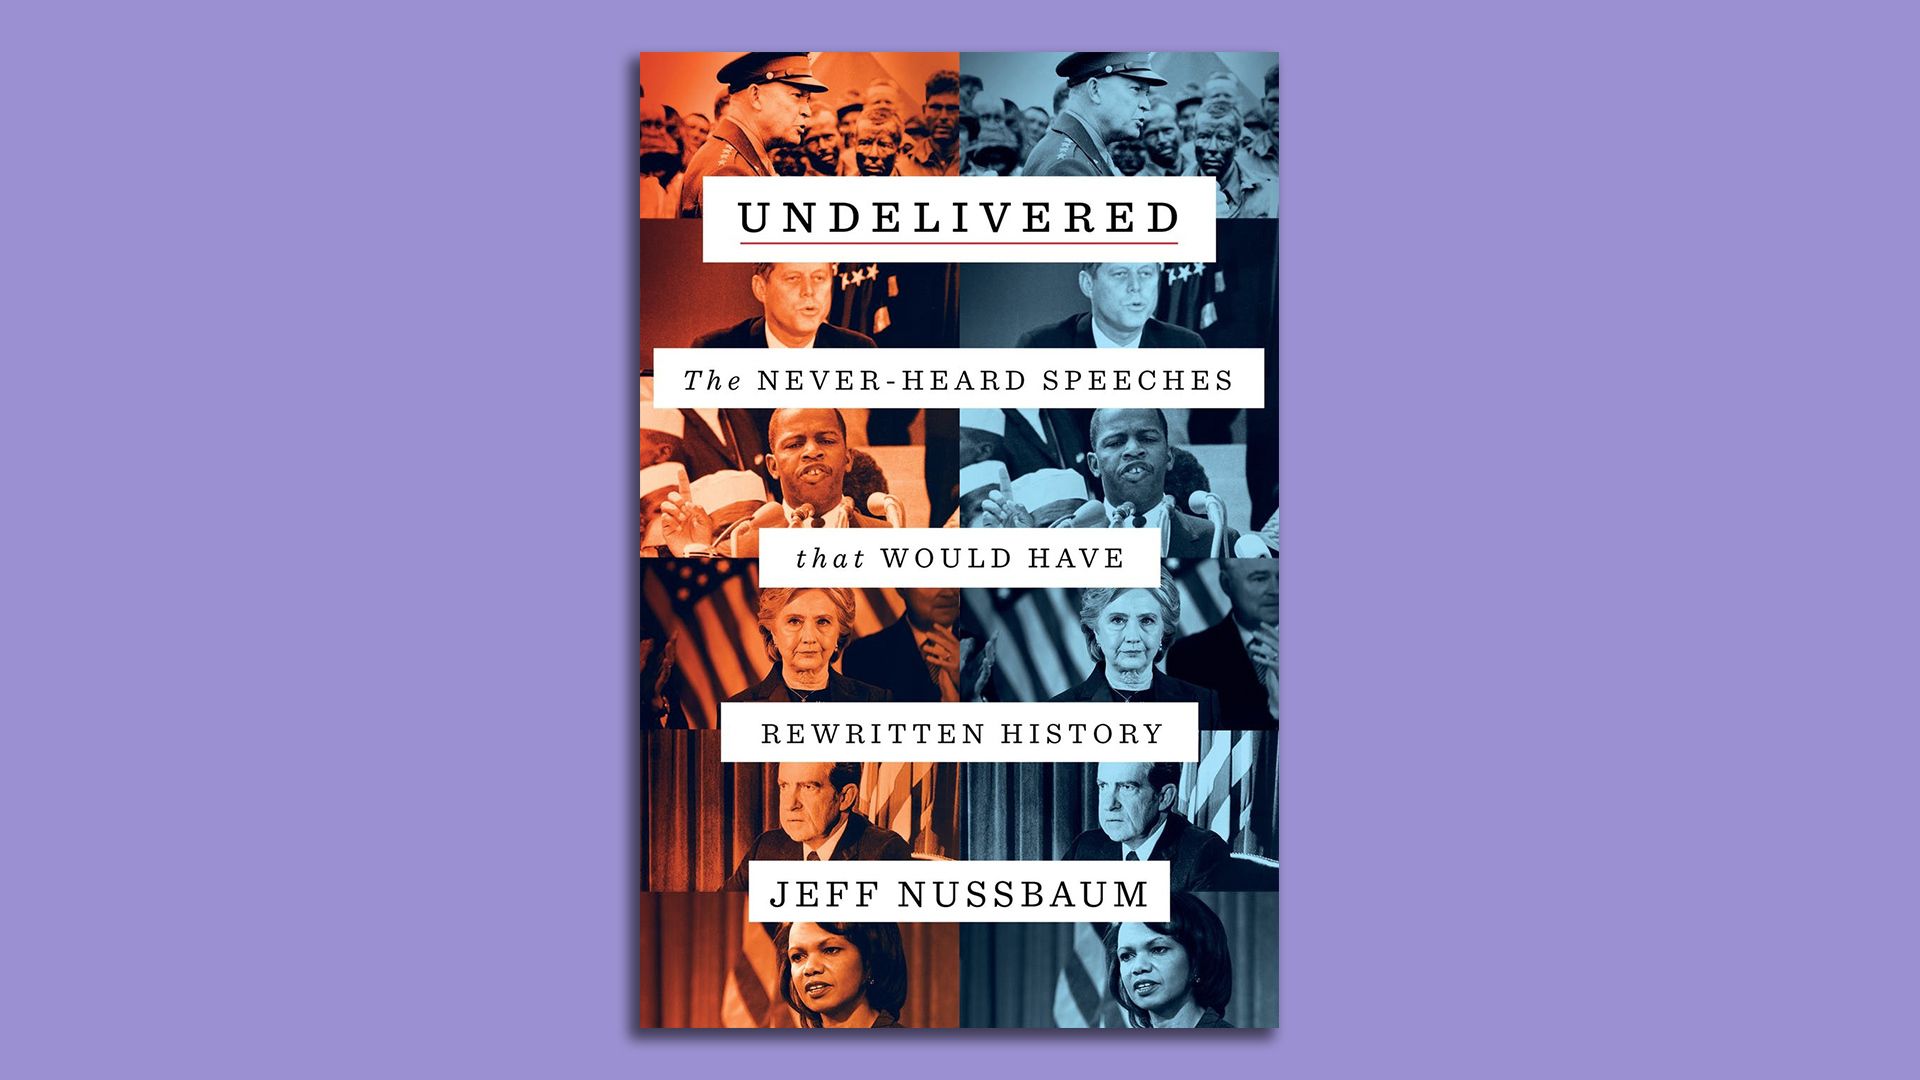 Image of the cover of "Undelivered" by Jeff Nussbaum